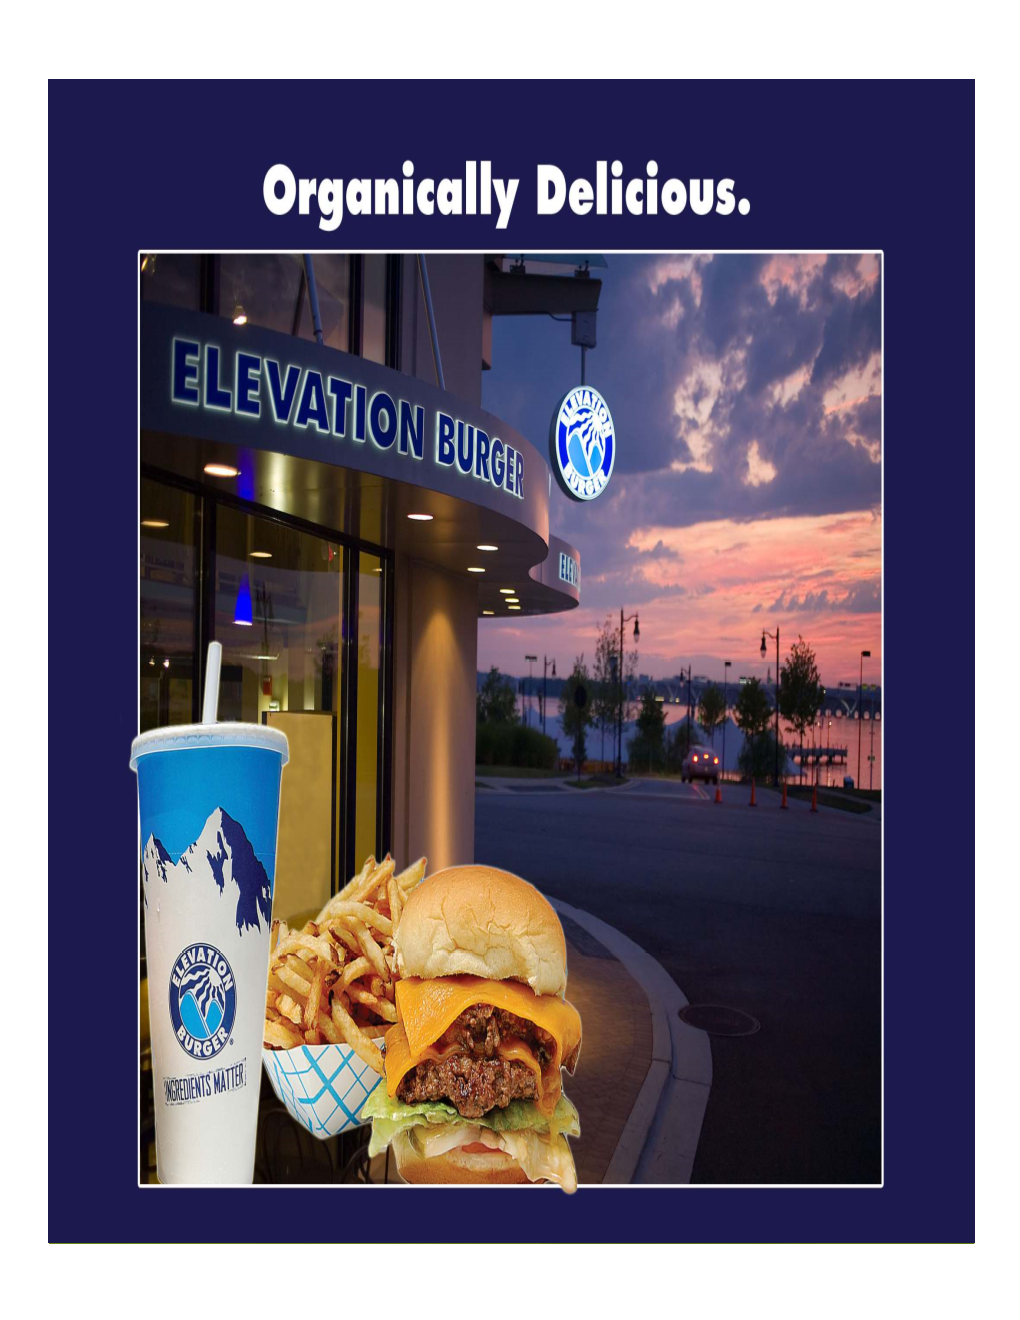 Elevation Burger to Spread the Gospel of Great�Tasting, 100% Organic Burgers Made from Grass�Fed Beef That Are Better for You and Better for the Environment